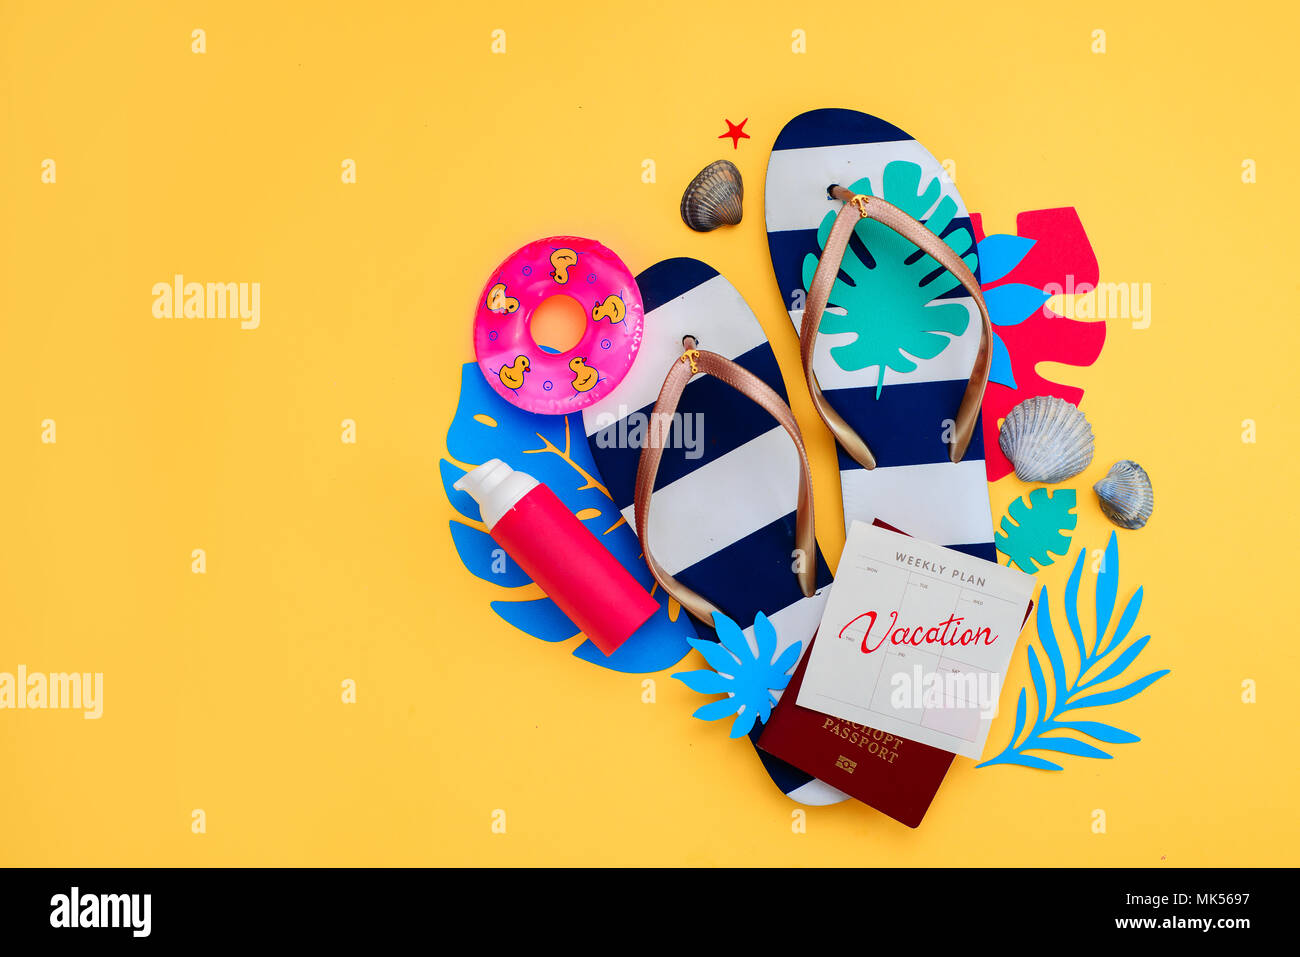 Summer holiday concept, travel and beach accessories with copy space. Flip flops, tropical leaves and a calendar with Vacation note on a vibrant yellow background. Stock Photo